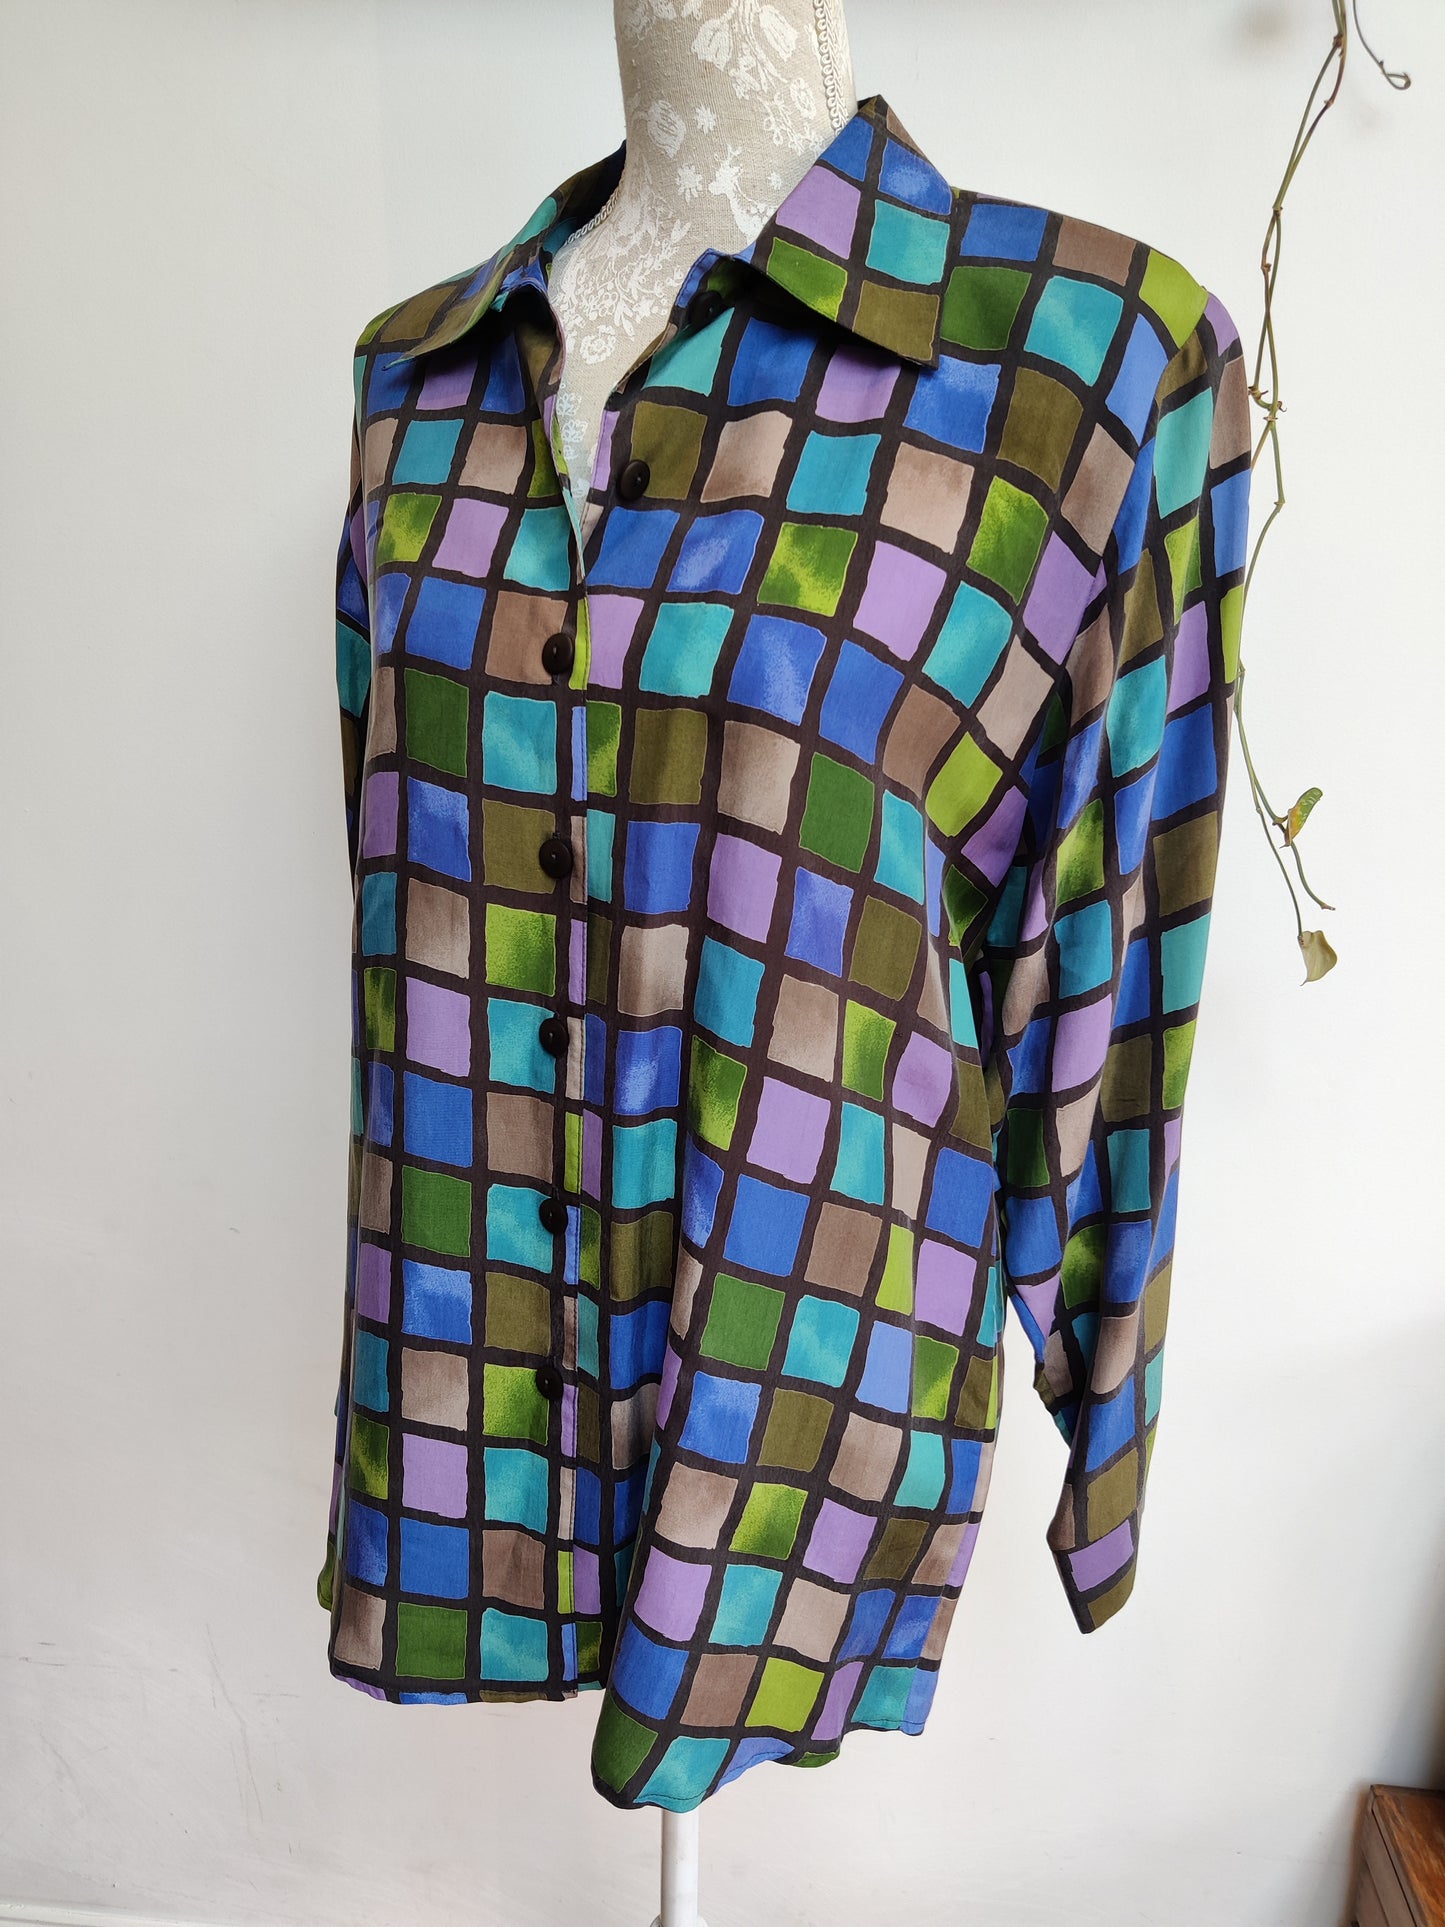 80s shirt with colourful retro print.